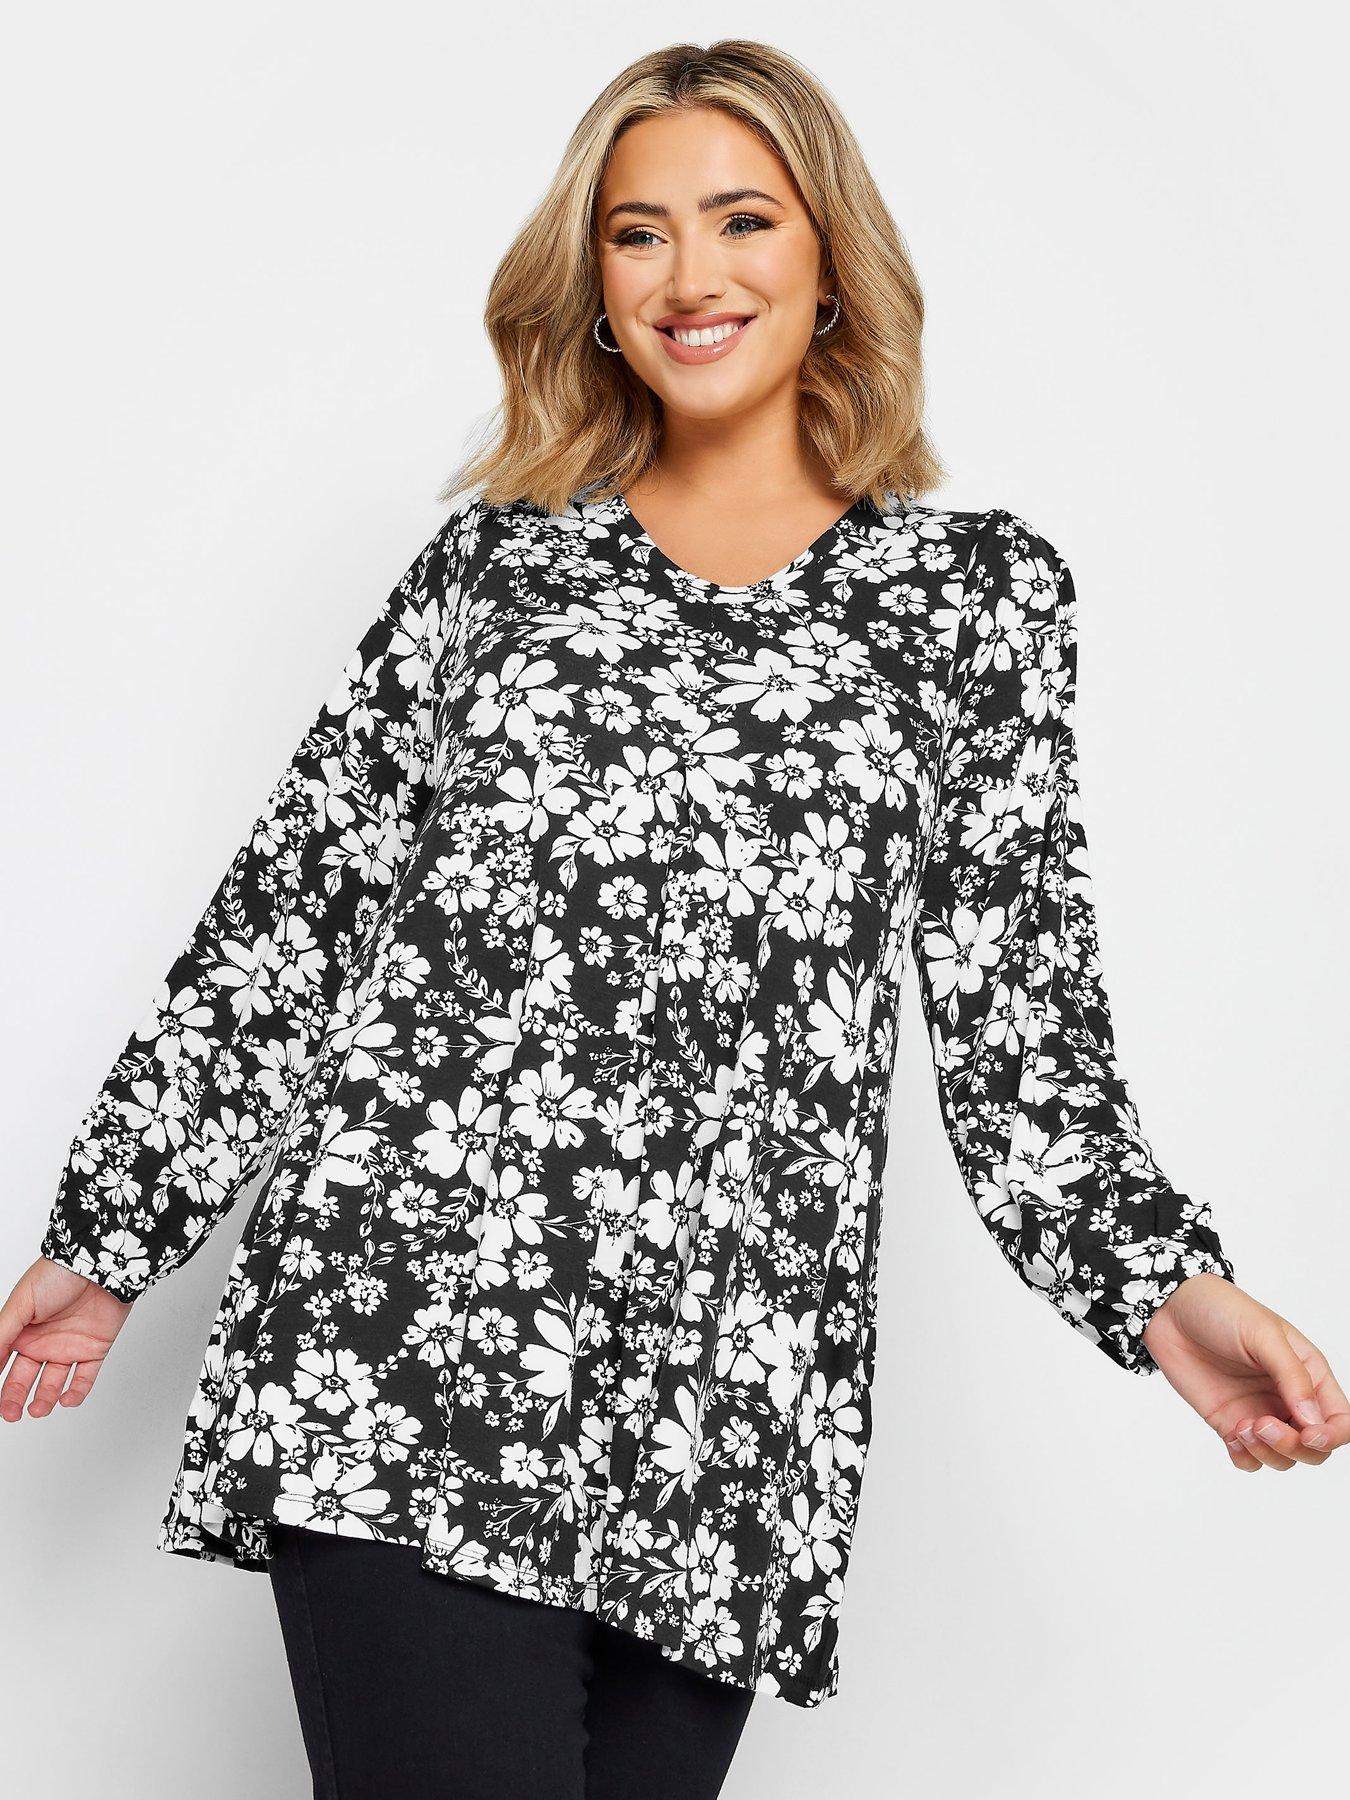 YOURS 2 PACK Plus Size Black & White Broderie Anglaise Swing Tops